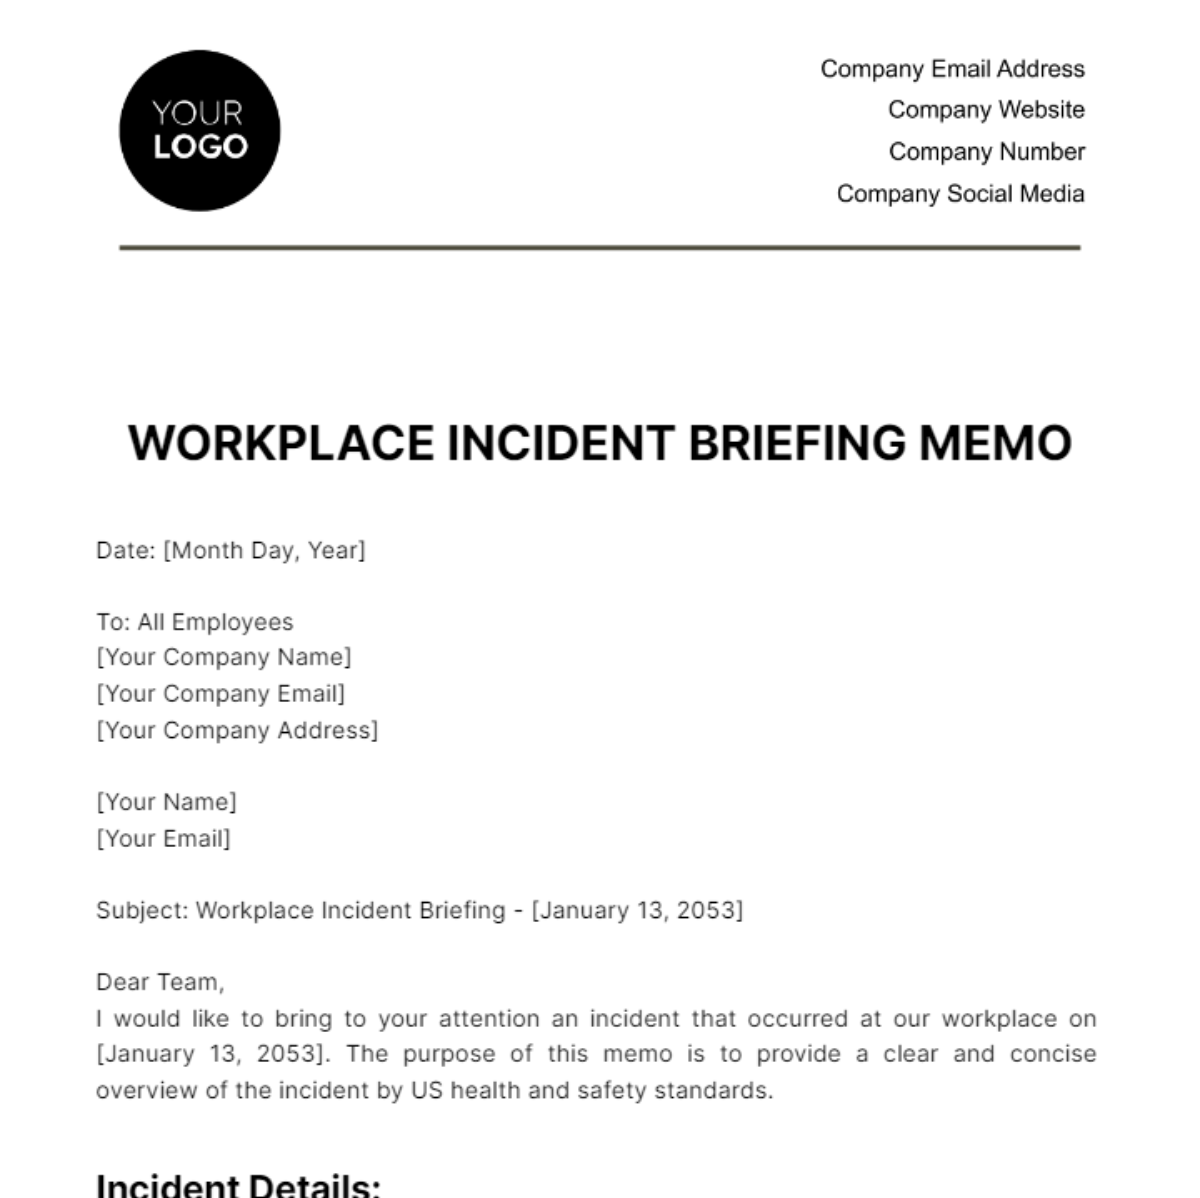 Workplace Incident Briefing Memo Template